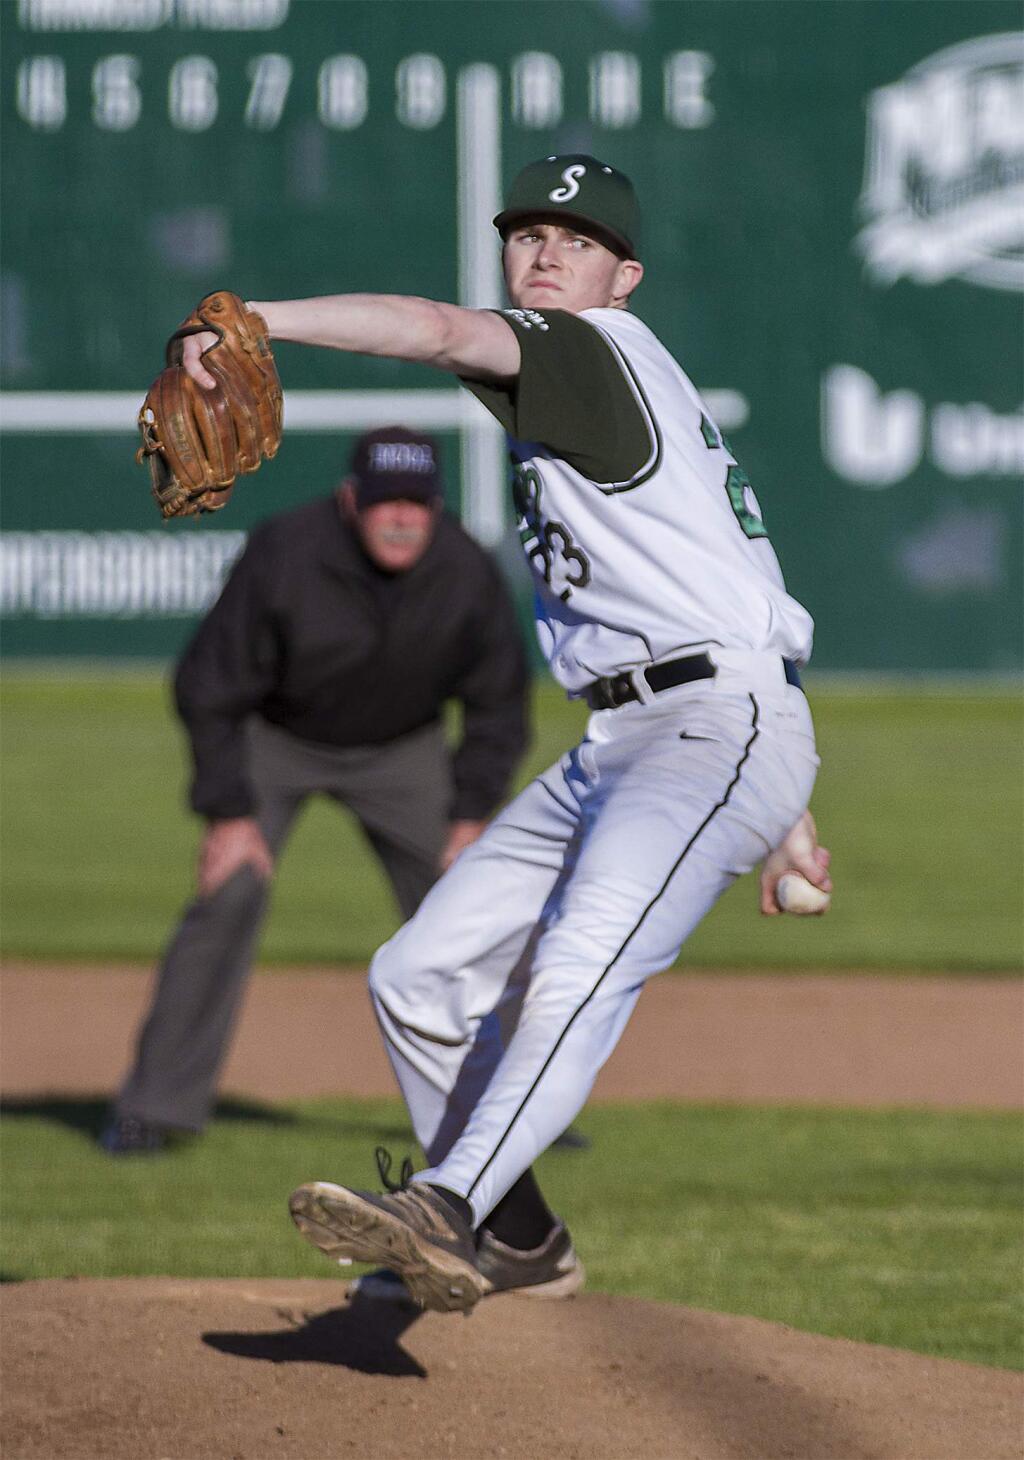 Robbi Pengelli/Index-TribuneSonoma's Shane O'Malley delivers a pitch during Tuesday's game against Justin-Siena.